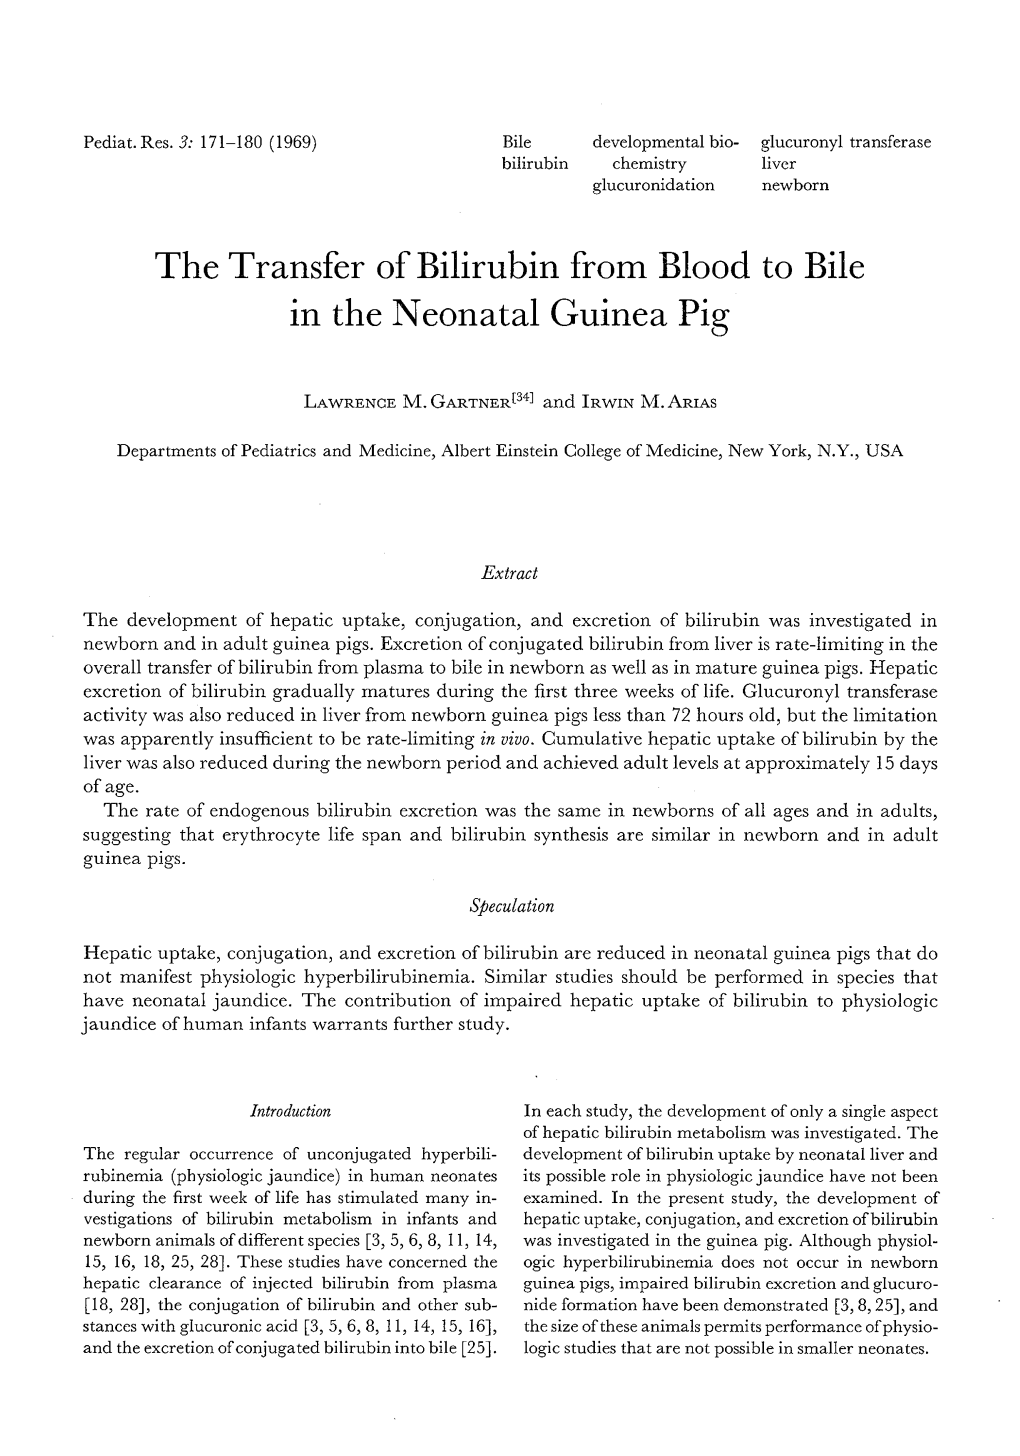 The Transfer of Bilirubin from Blood to Bile in the Neonatal Guinea Pig